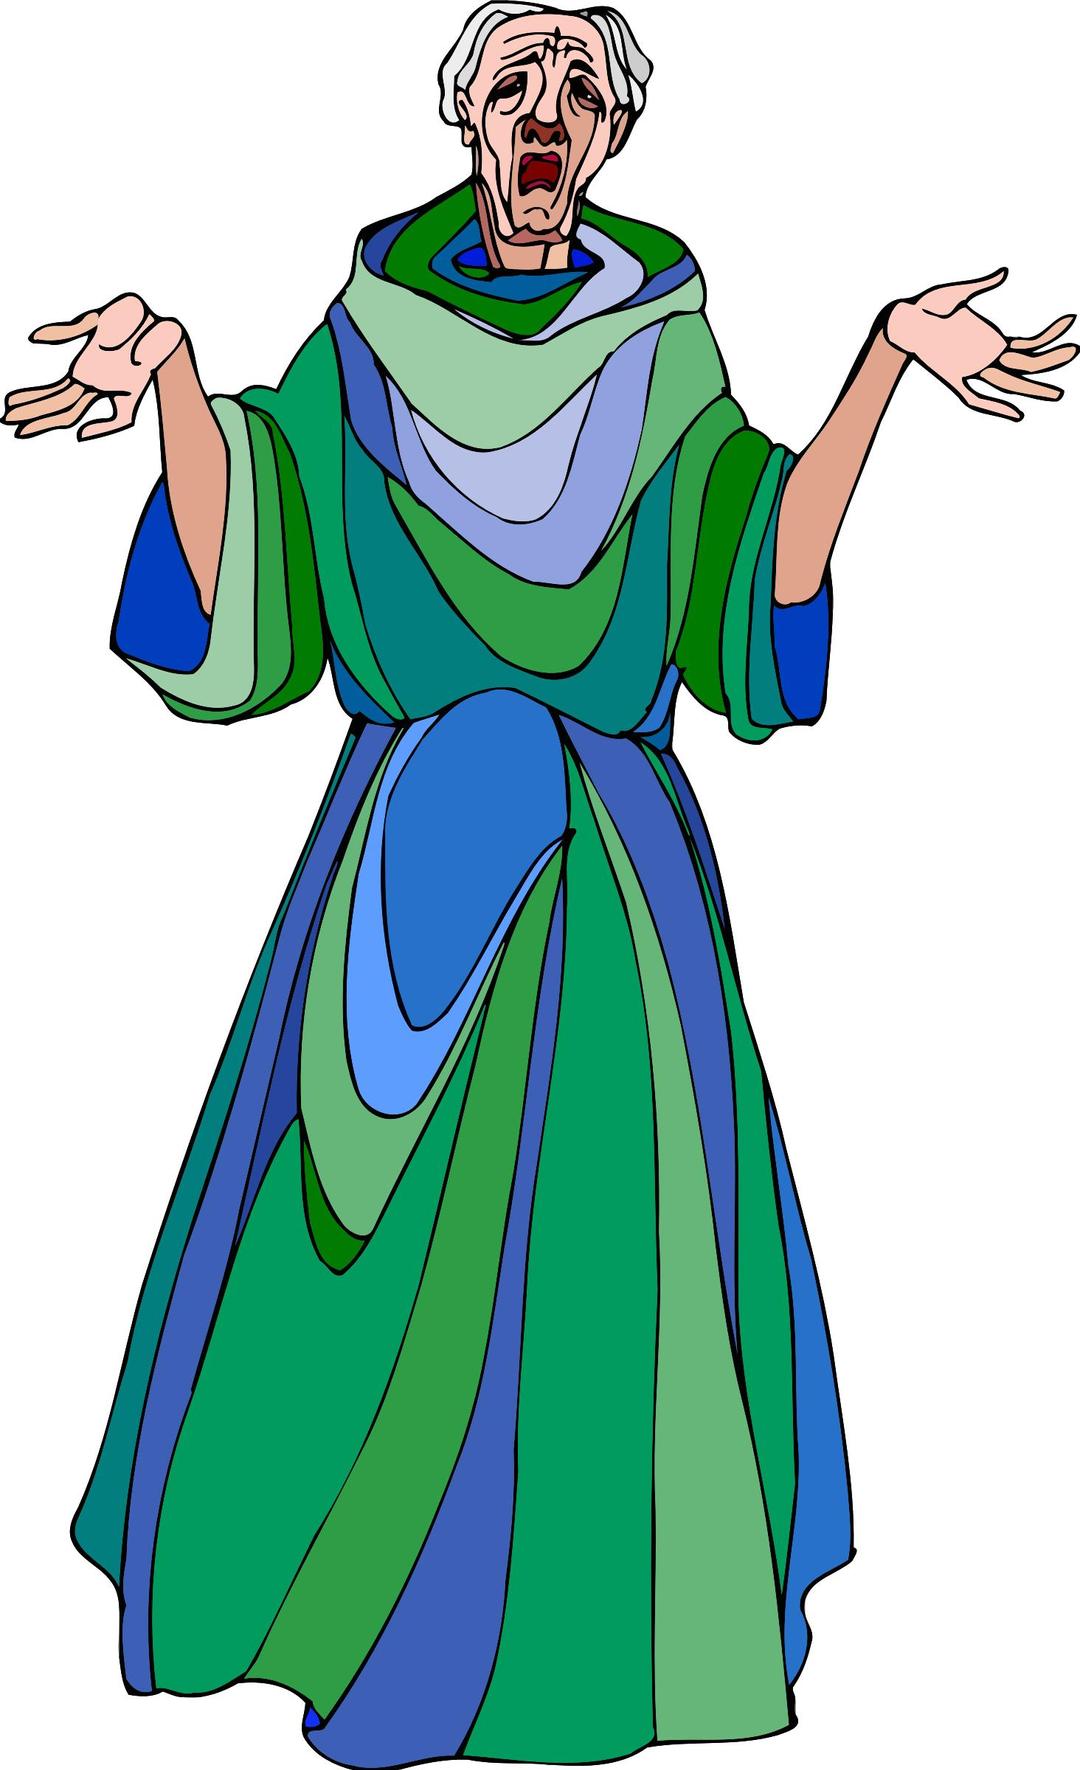 Shakespeare characters - monk (colour) png transparent